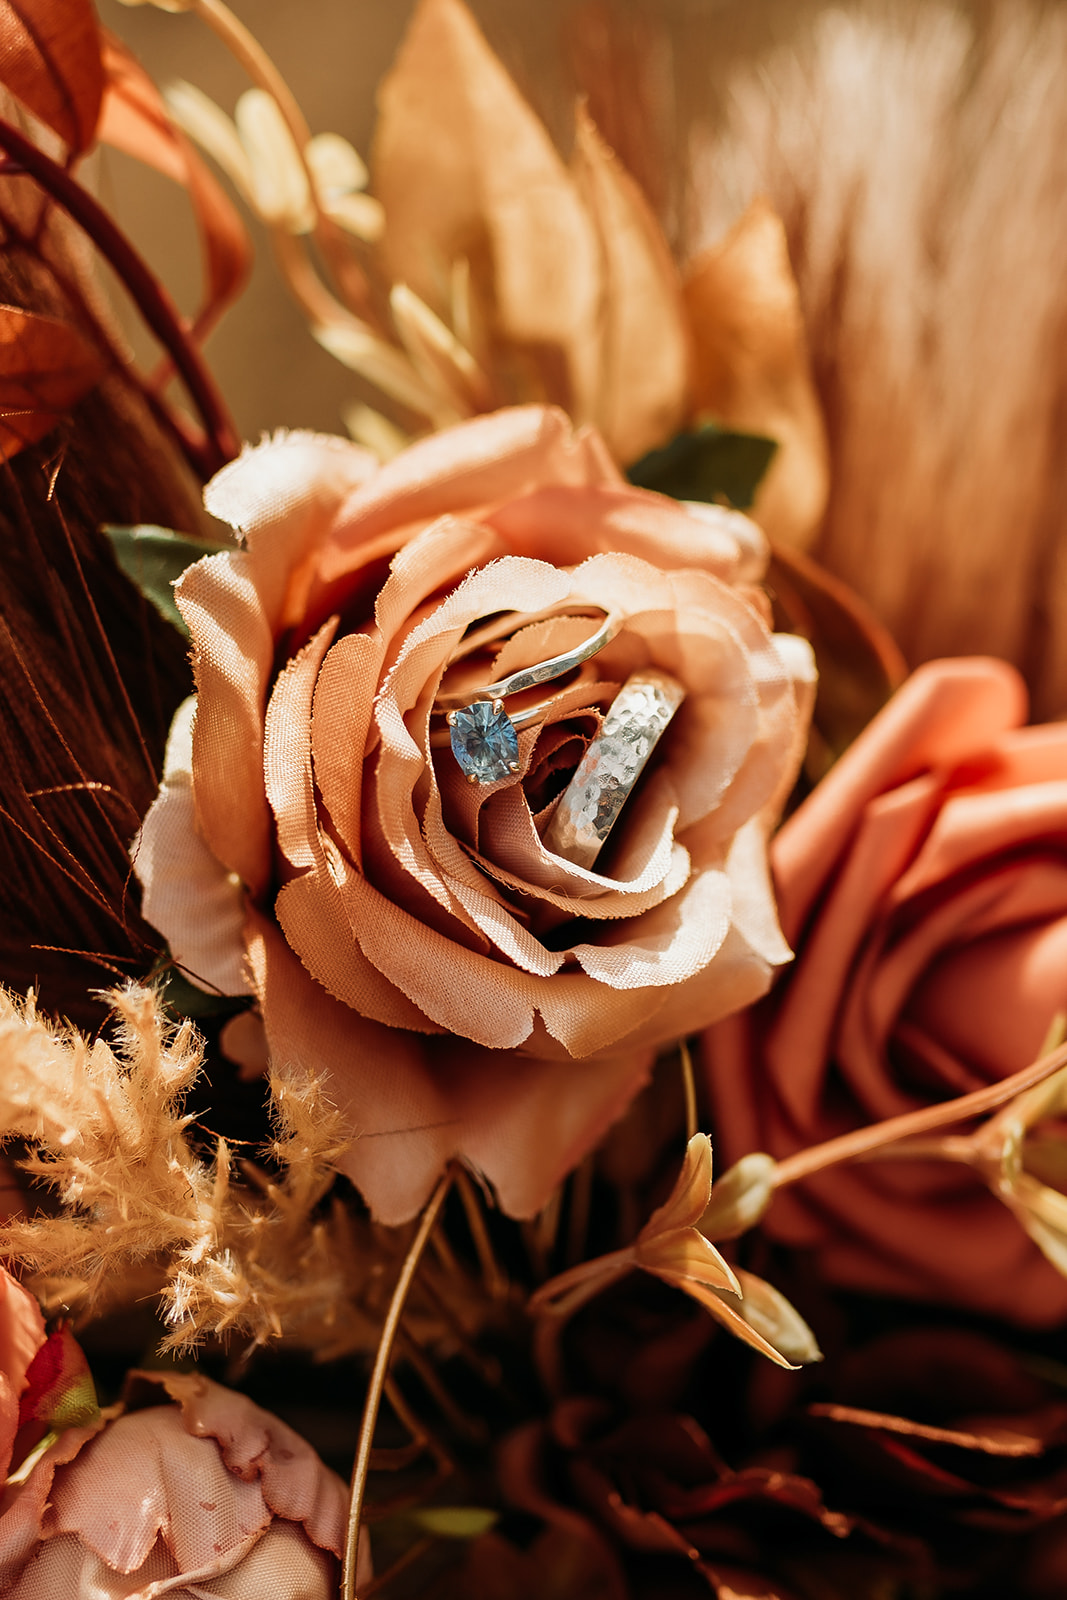 Close-up of the bride and groom's rings, a highlight of this intimate Connecticut wedding